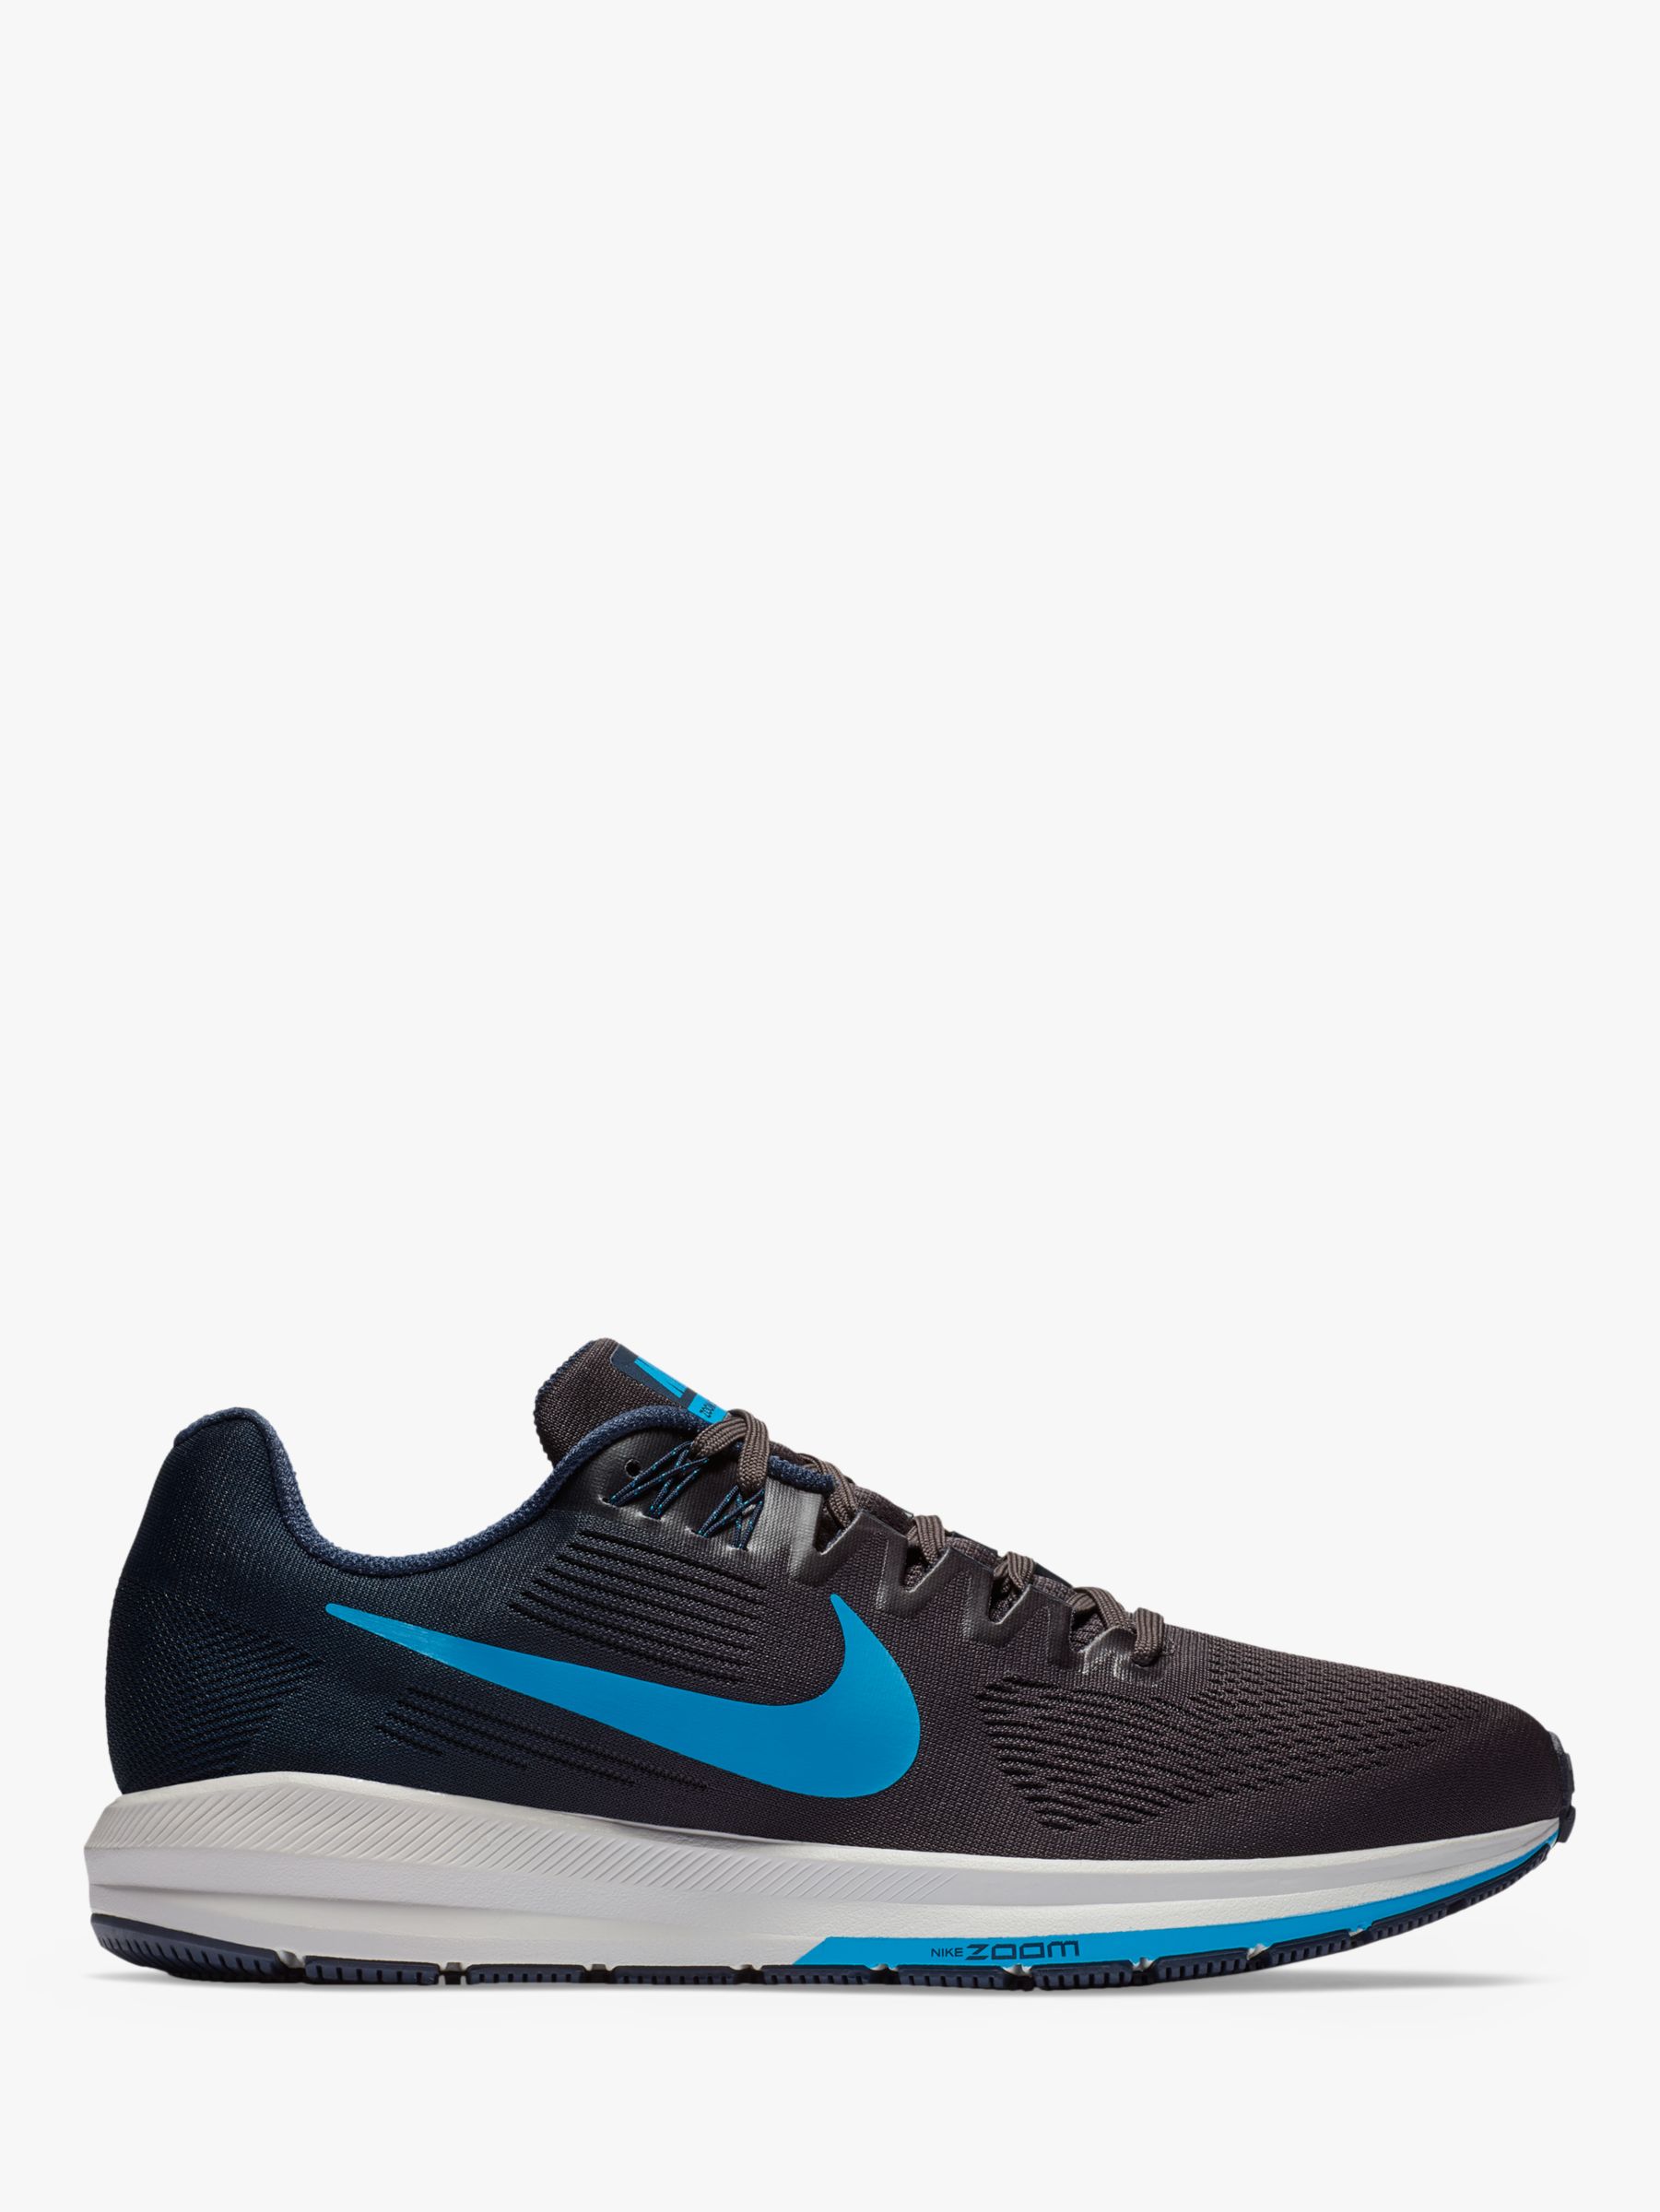 men's nike zoom structure 21